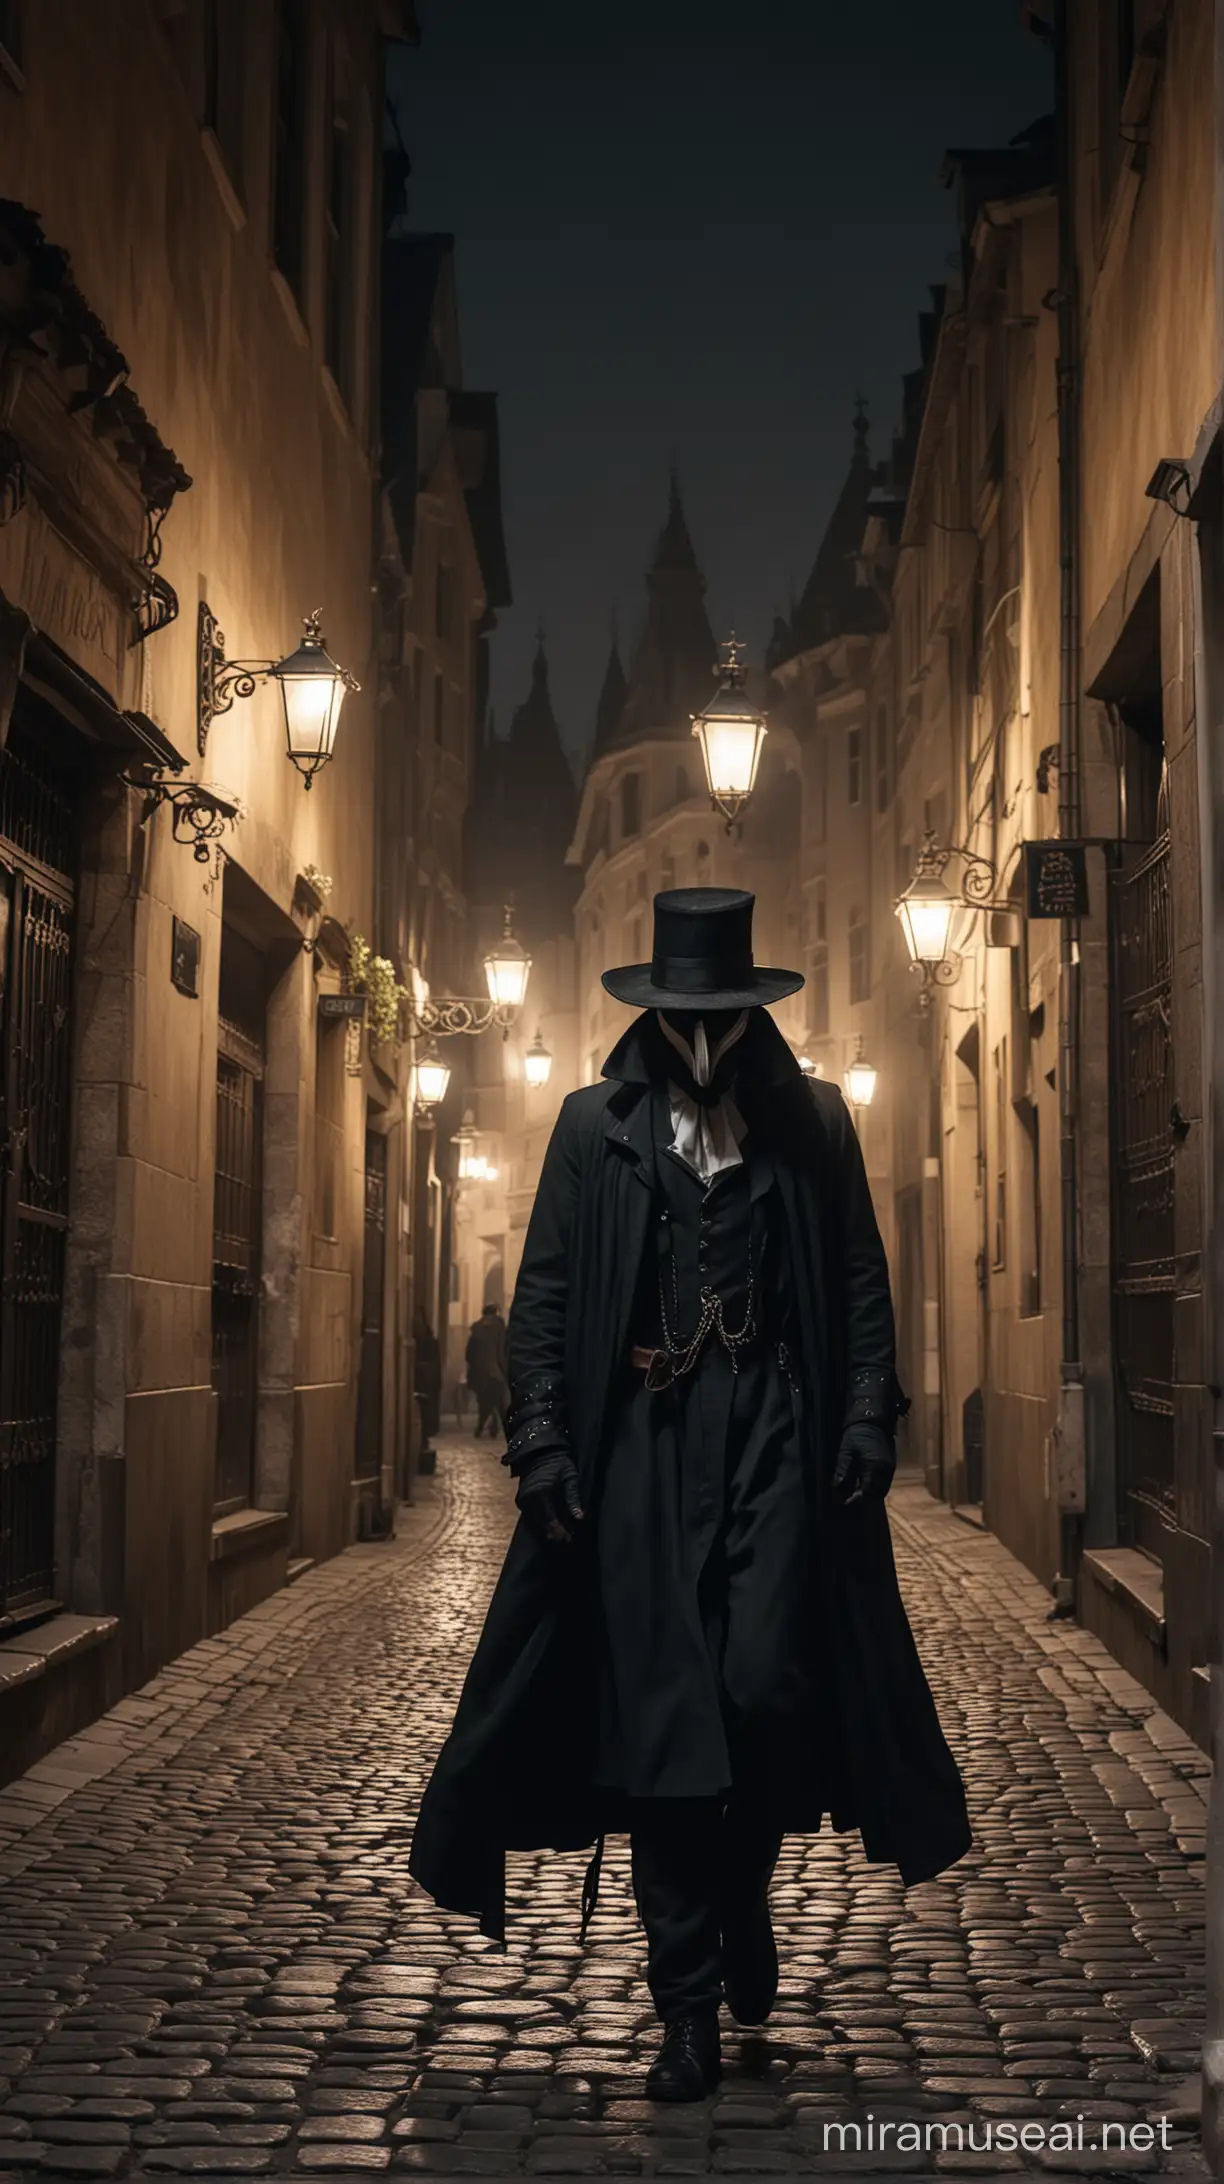 An evocative cinematic portrait of a young man dressed as a plague doctor, strolling through the dimly lit streets of Renaissance Vienna. He wears the traditional long black robe, tall hat, and beak-like mask, yet his outfit is adorned with intricate, modern patterns. His gaze is intense, reflecting the passion of young love. The background reveals cobblestone streets, antique buildings, and flickering torchlight, creating an atmosphere of dark fantasy and historical intrigue., dark fantasy, portrait photography, photo, cinematic